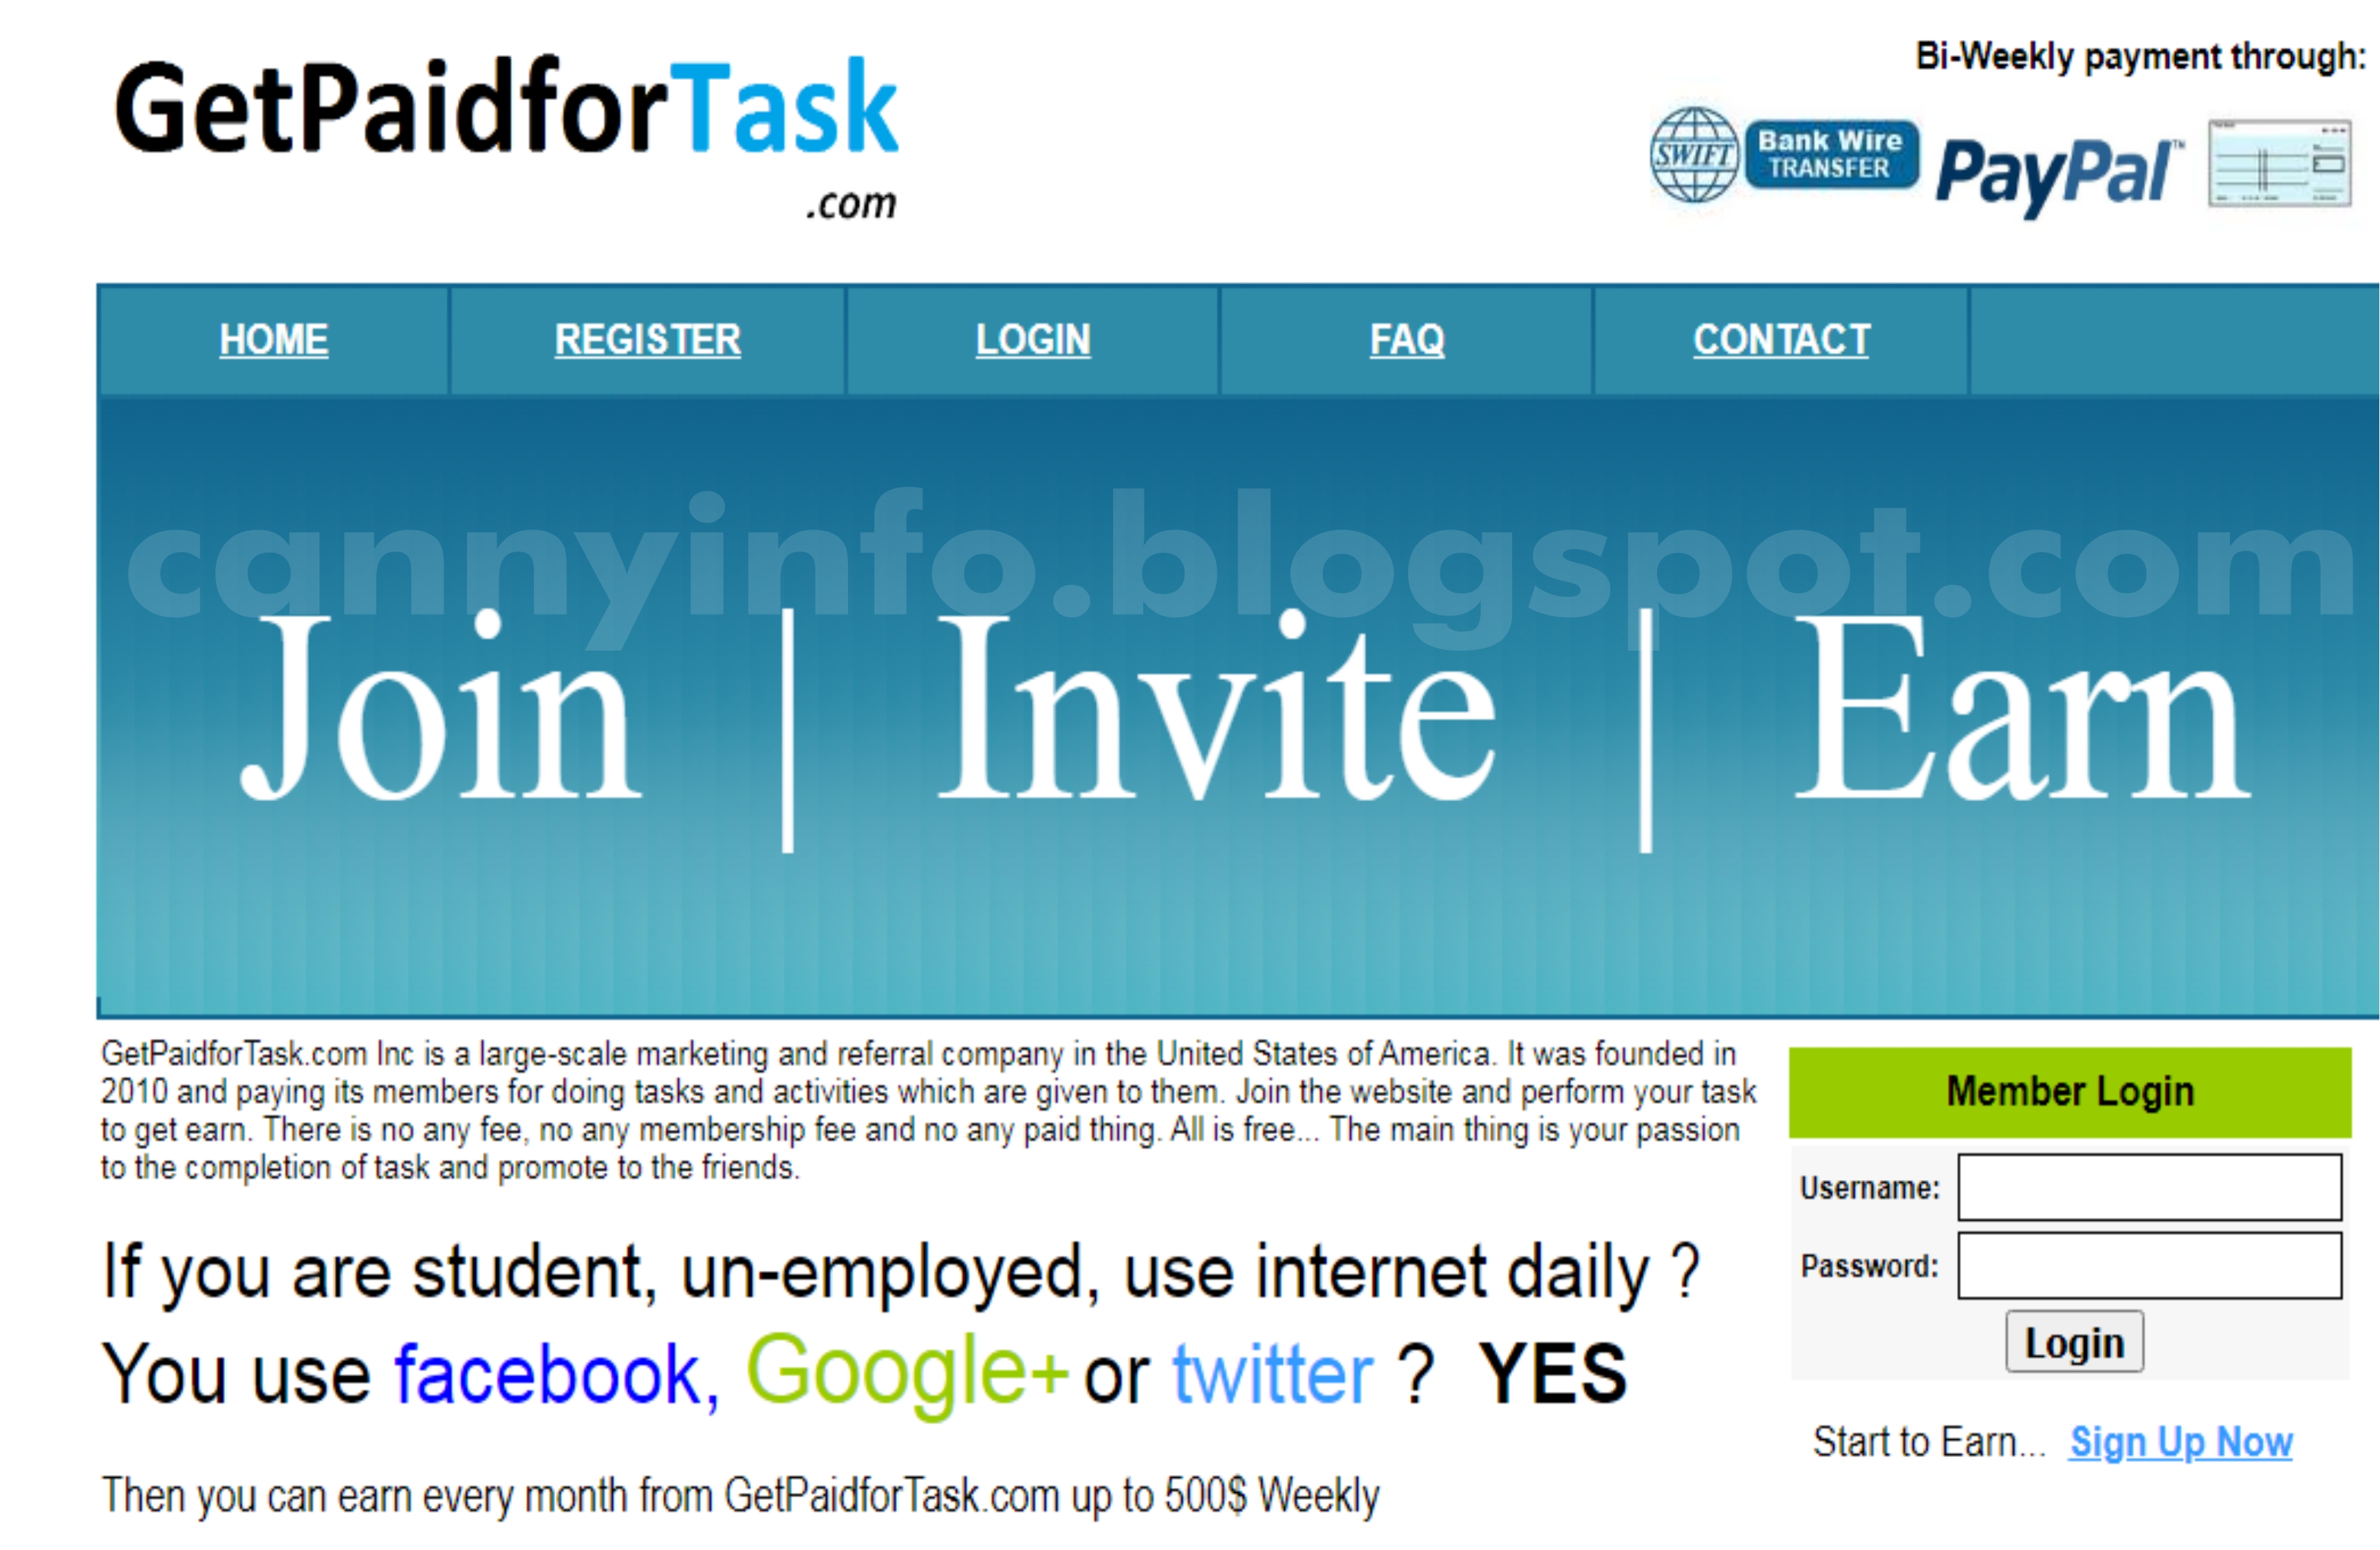 GETPAIDFORTASK.COM REVIEWS (IS GETPAIDFORTASK.COM LEGIT OR SCAM, REAL OR FAKE, PAYING ITS MEMBERS, WORTH YOUR TIME, ANOTHER SCAM?) FIND OUT ALL YOU NEED TO KNOW ABOUT THE SO-CALLED GETPAIDFORTASK.COM.